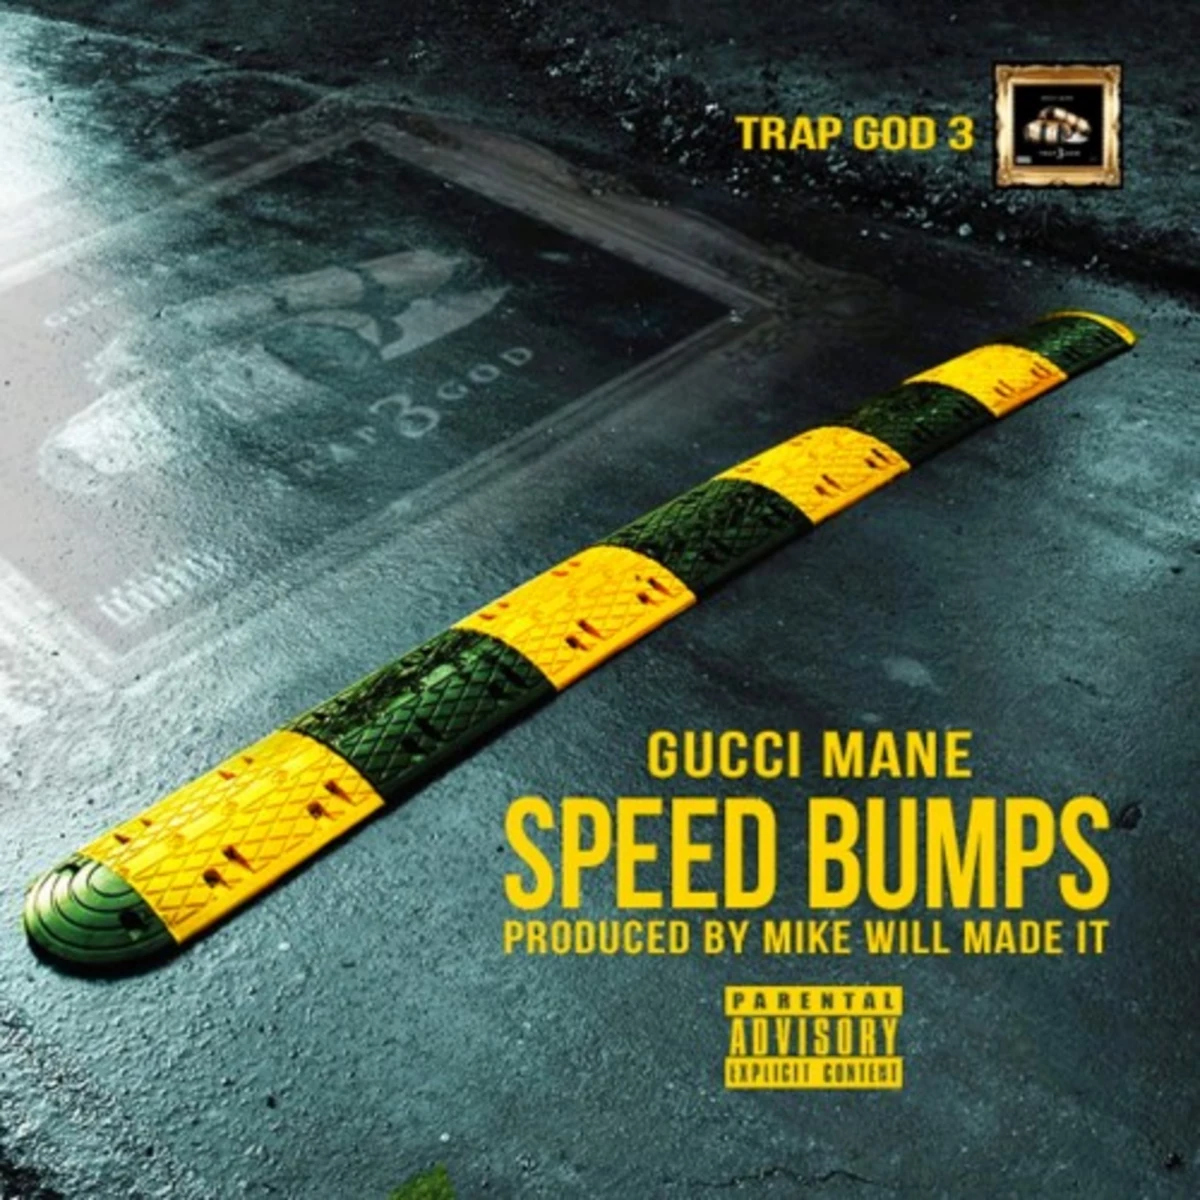 Gucci Mane “Speed Bumps” (Prod. By Mike Will Made It) - XXL